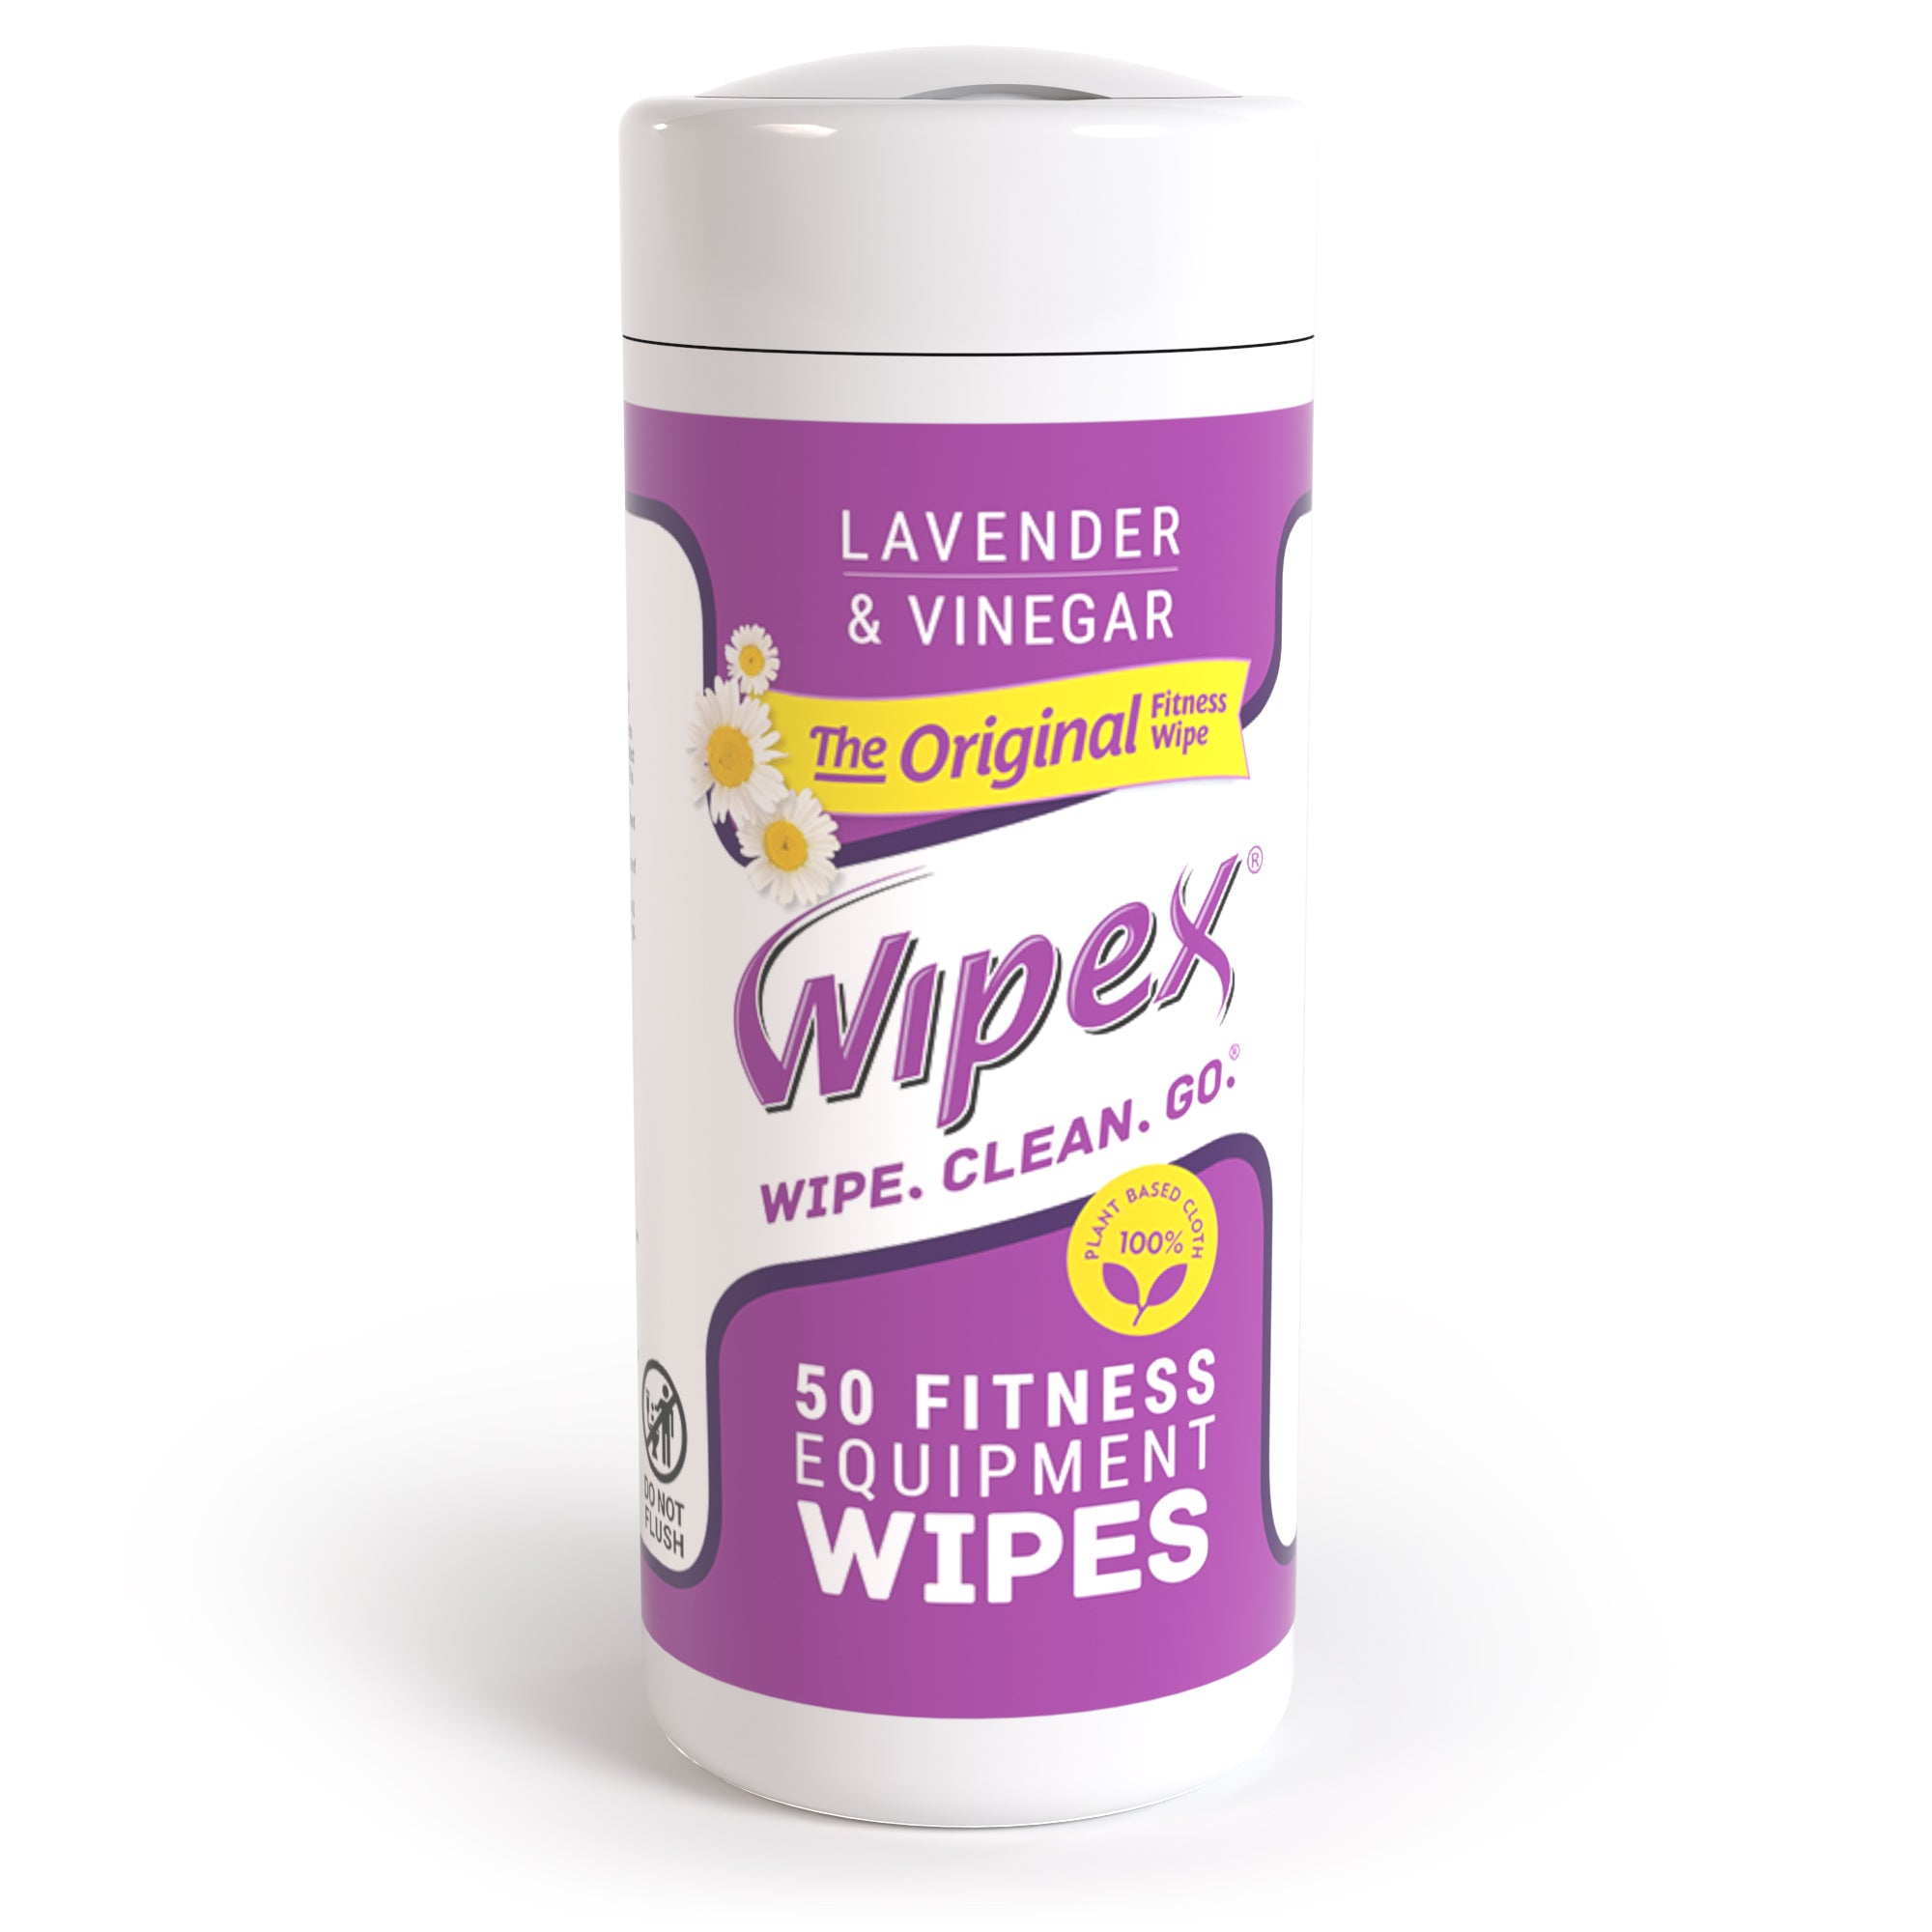 Wipex Table Bussers - Natural Surface Cleaner Wipes, Clove & Cinnamon